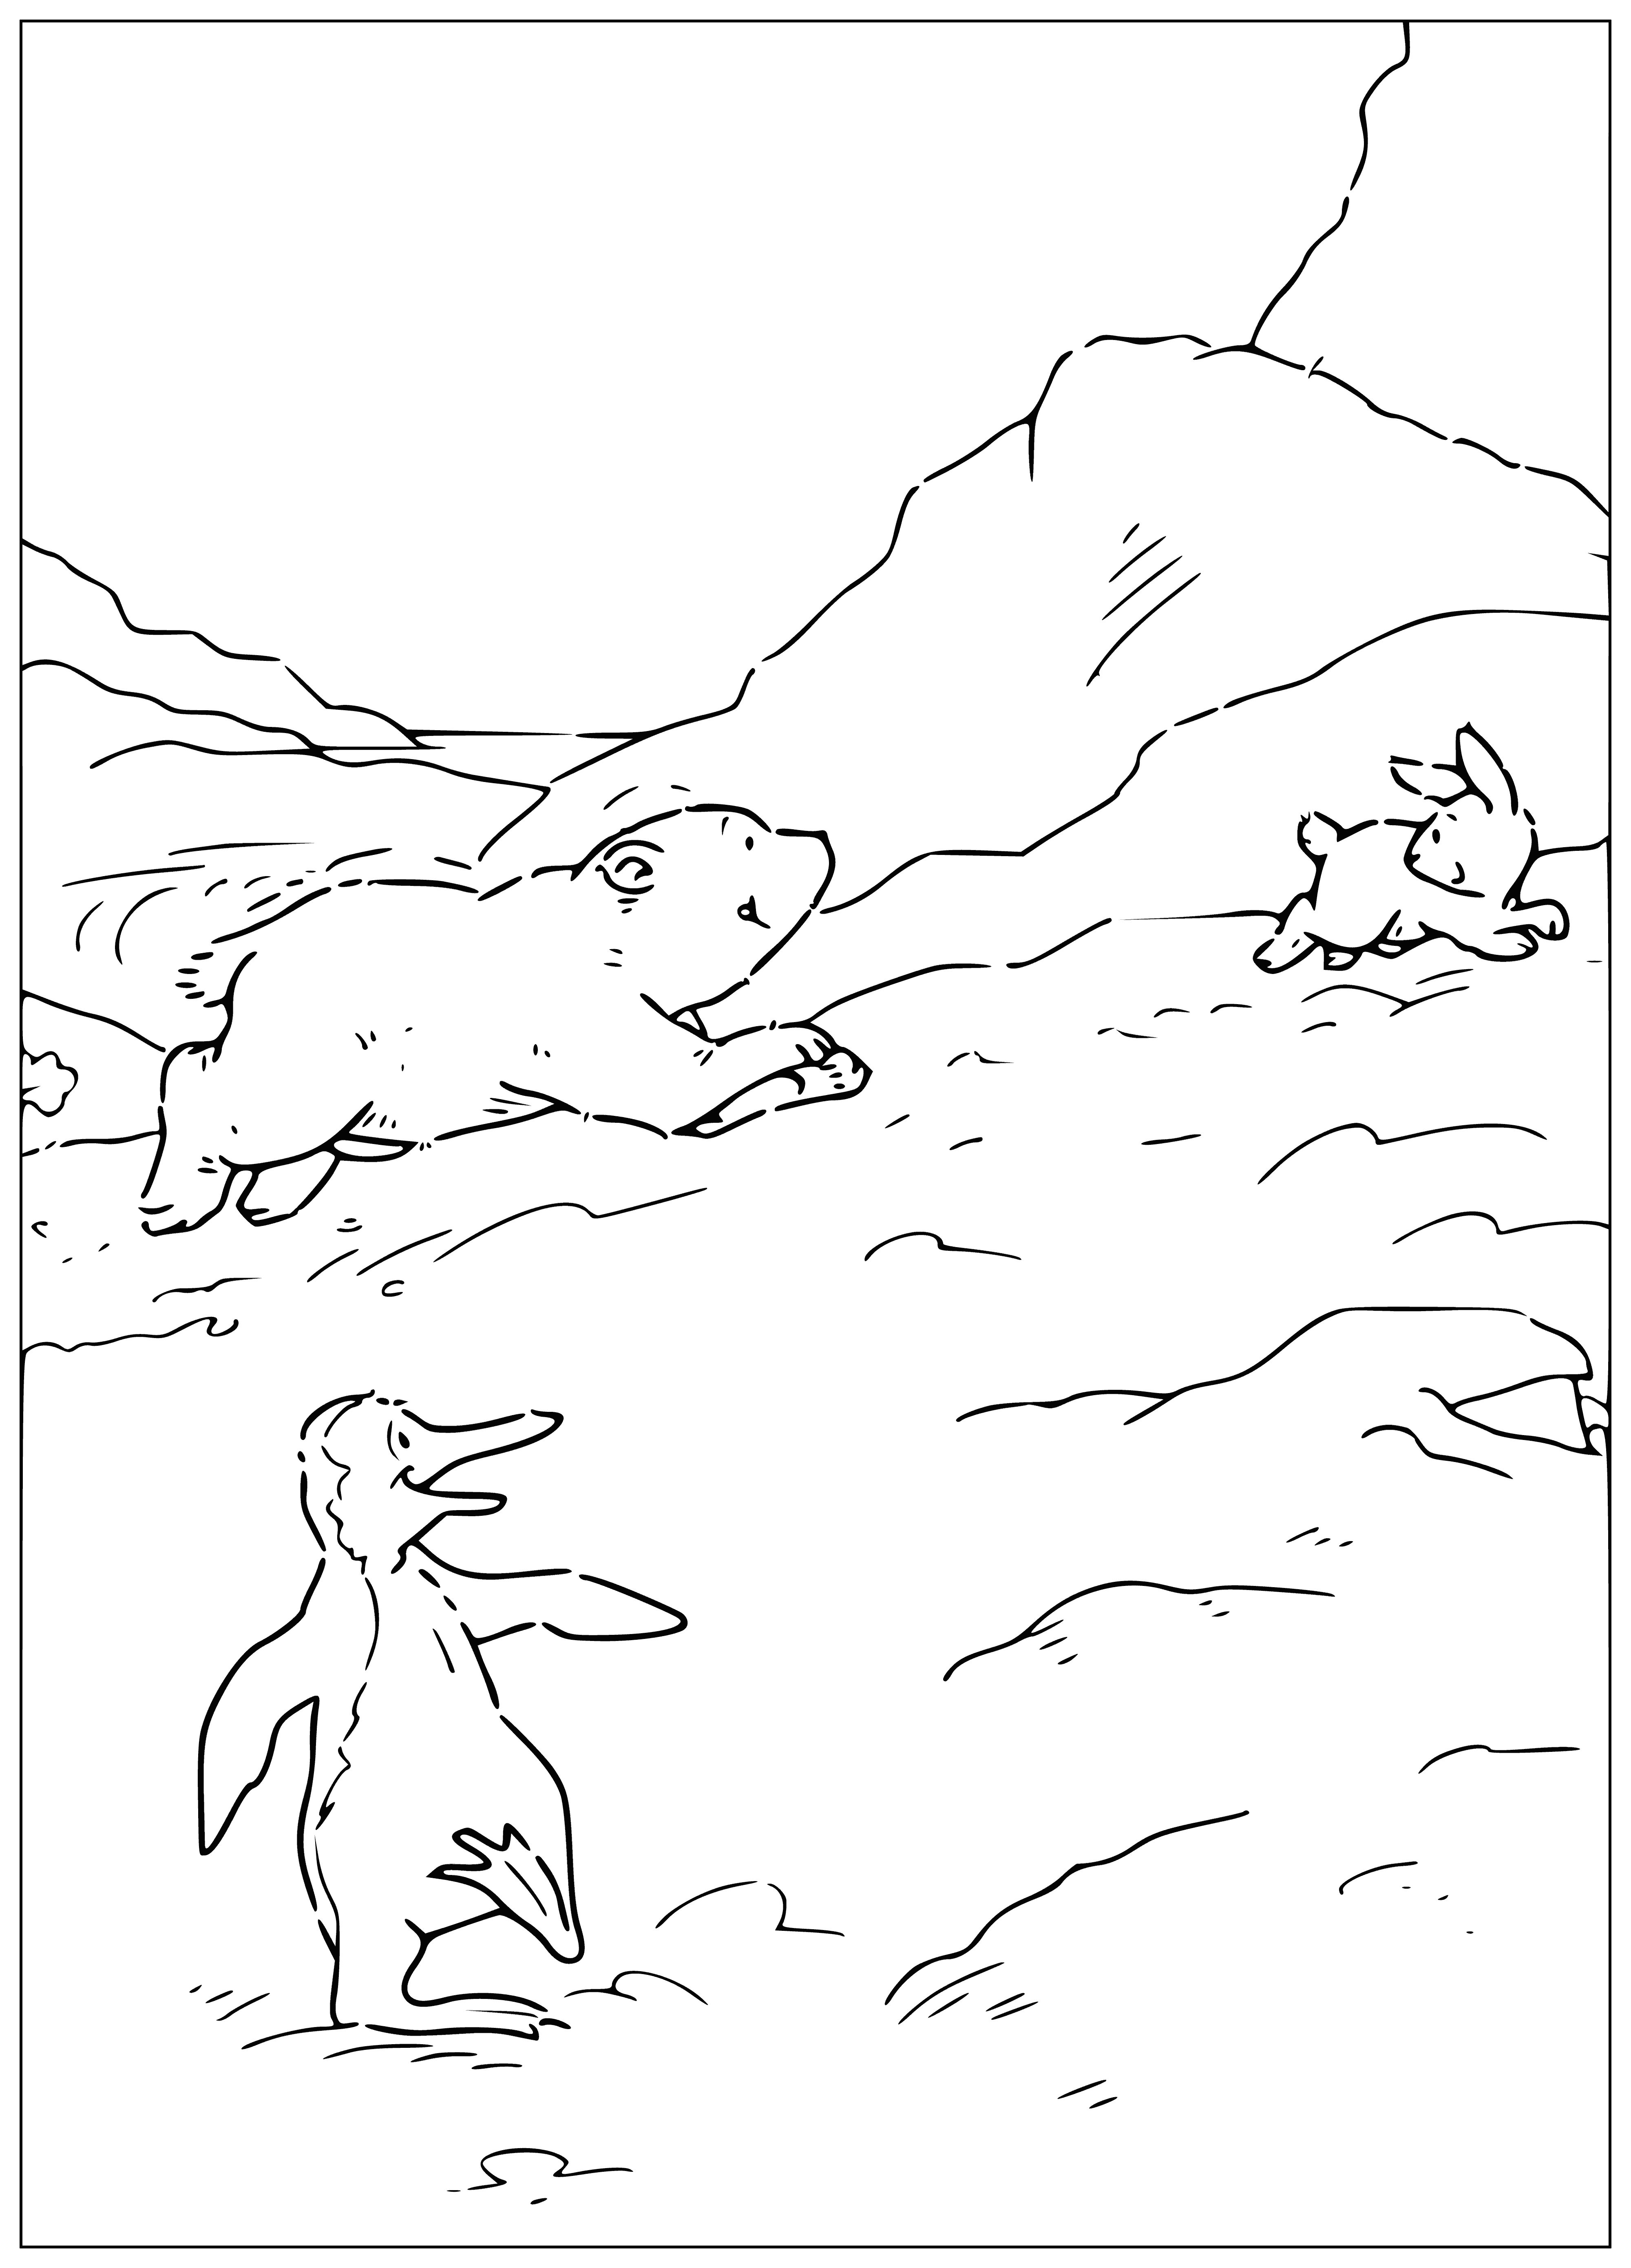 Lars and the bunny coloring page